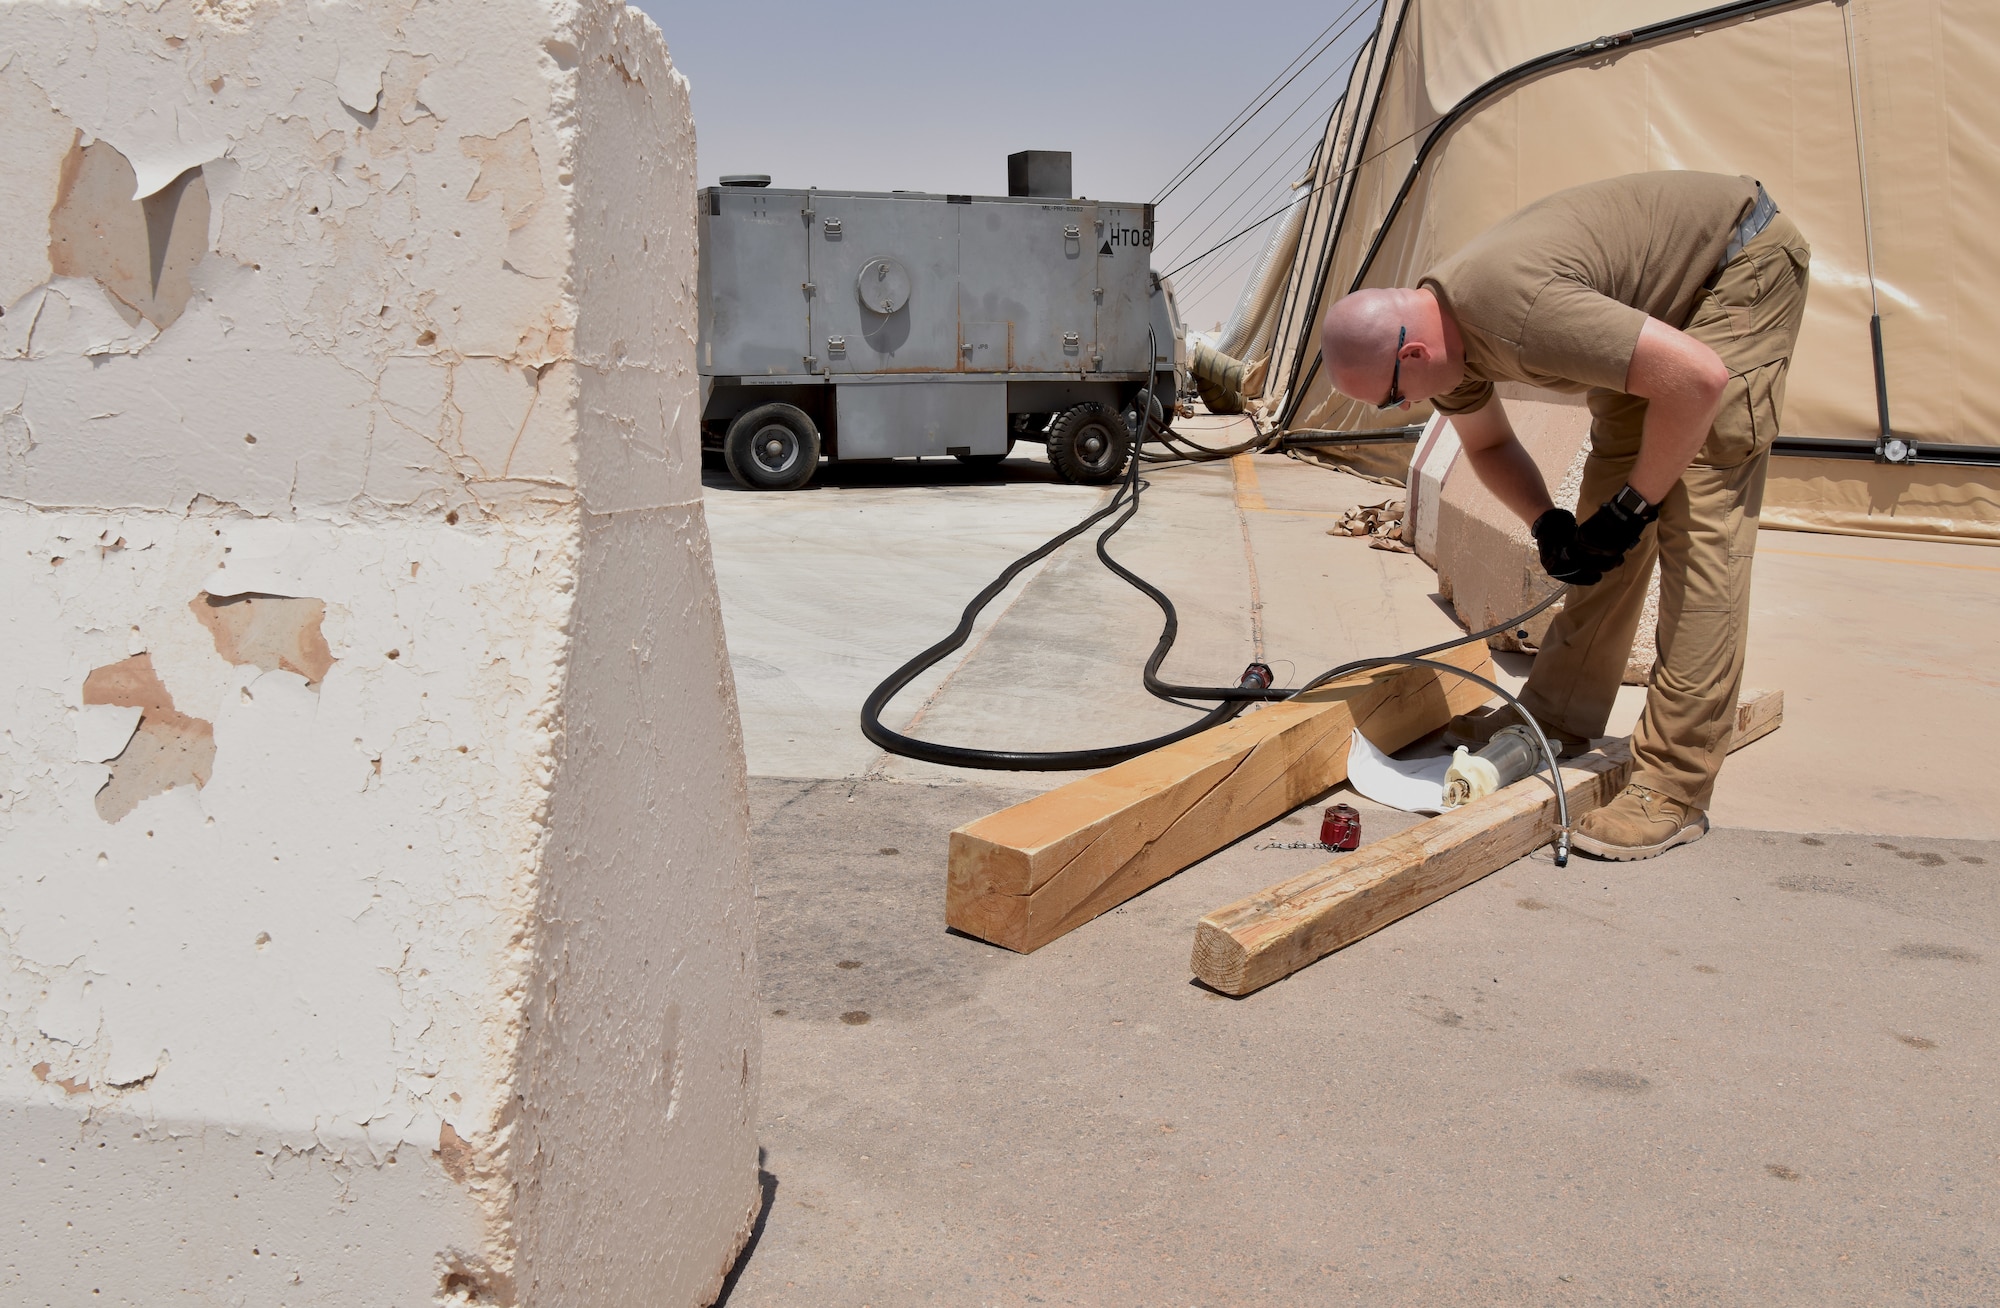 Airmen from the 378th Expeditionary Maintenance Squadron use innovation to test aircraft components at Prince Sultan Air Base, Kingdom of Saudi Arabia.